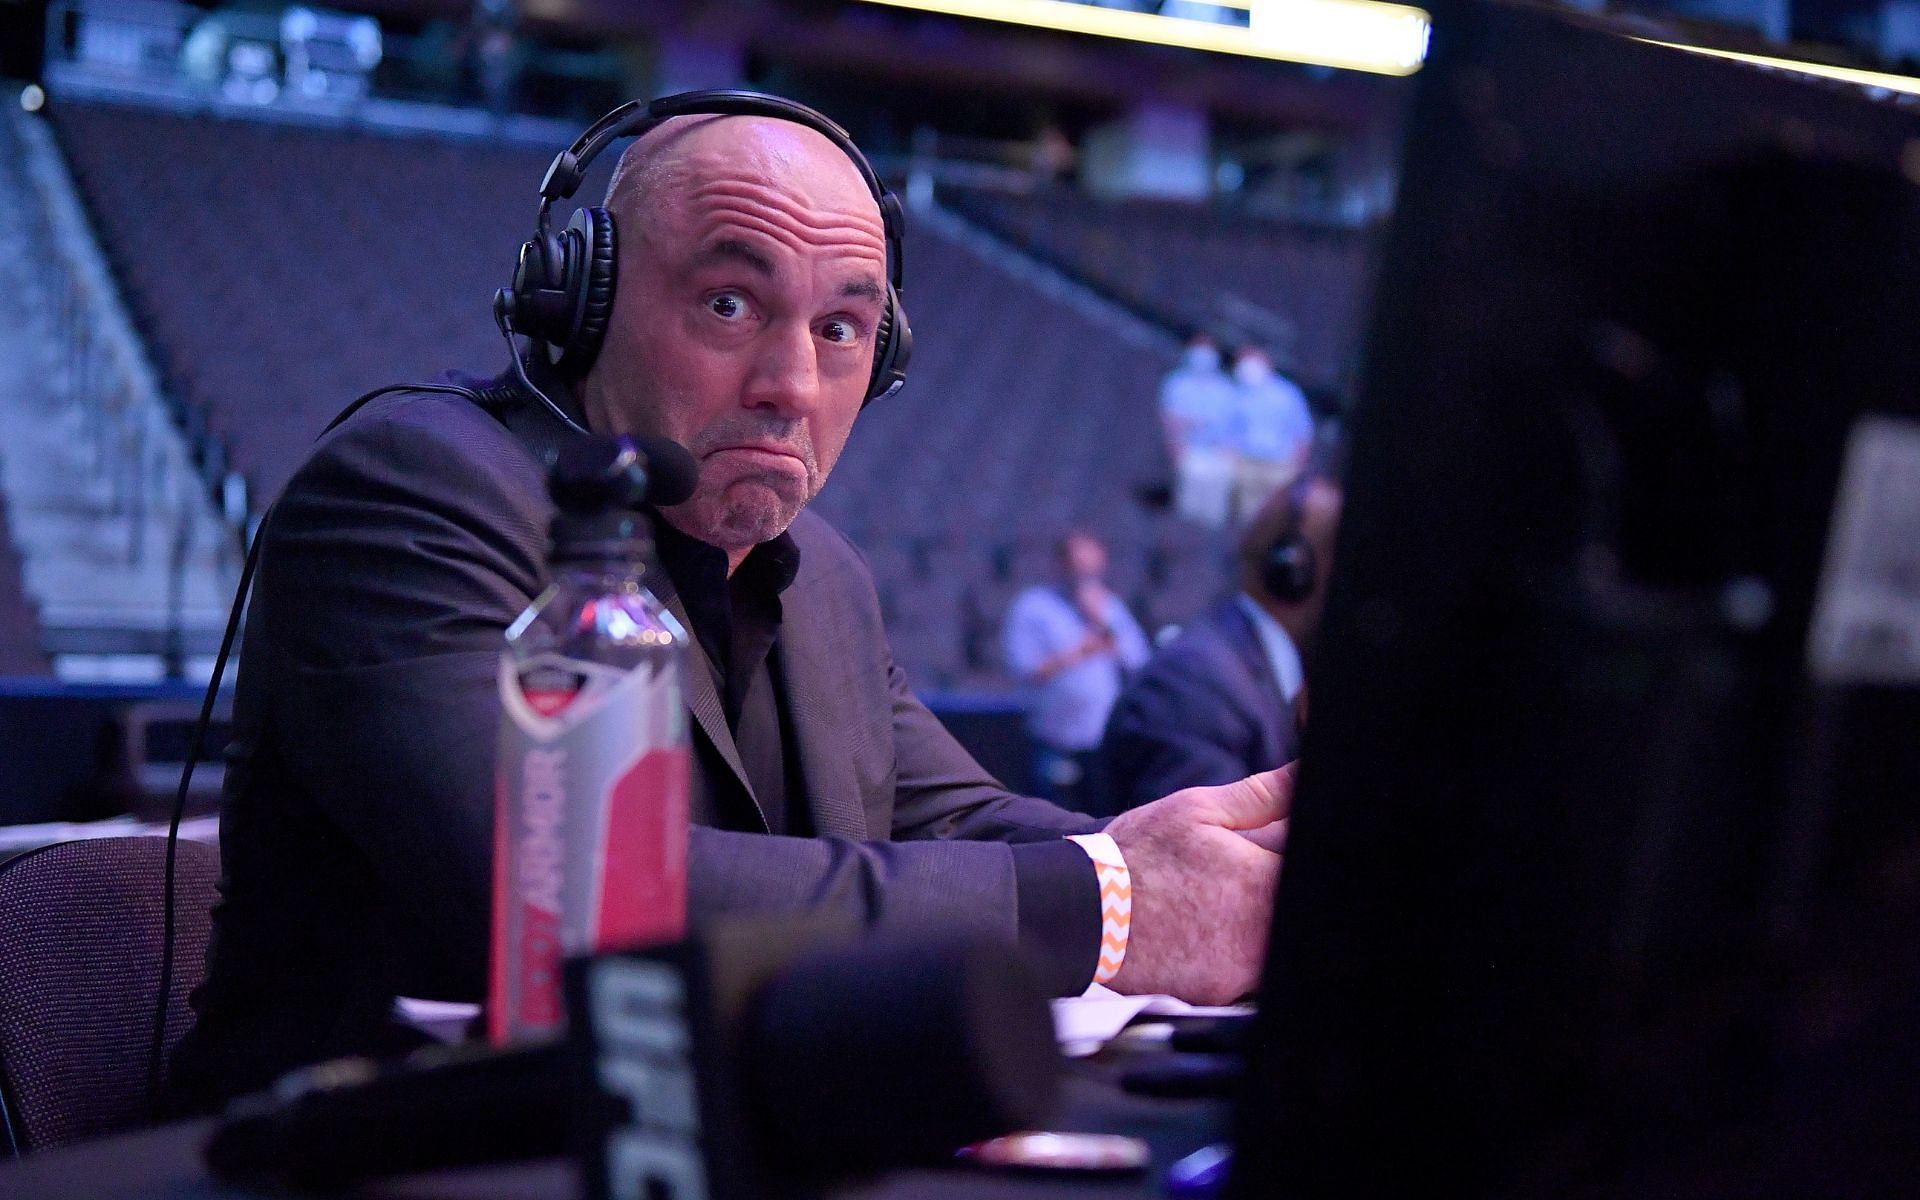 Joe Rogan reacts during a UFC 249 fight at the VyStar Veterans Memorial Arena in May 2020